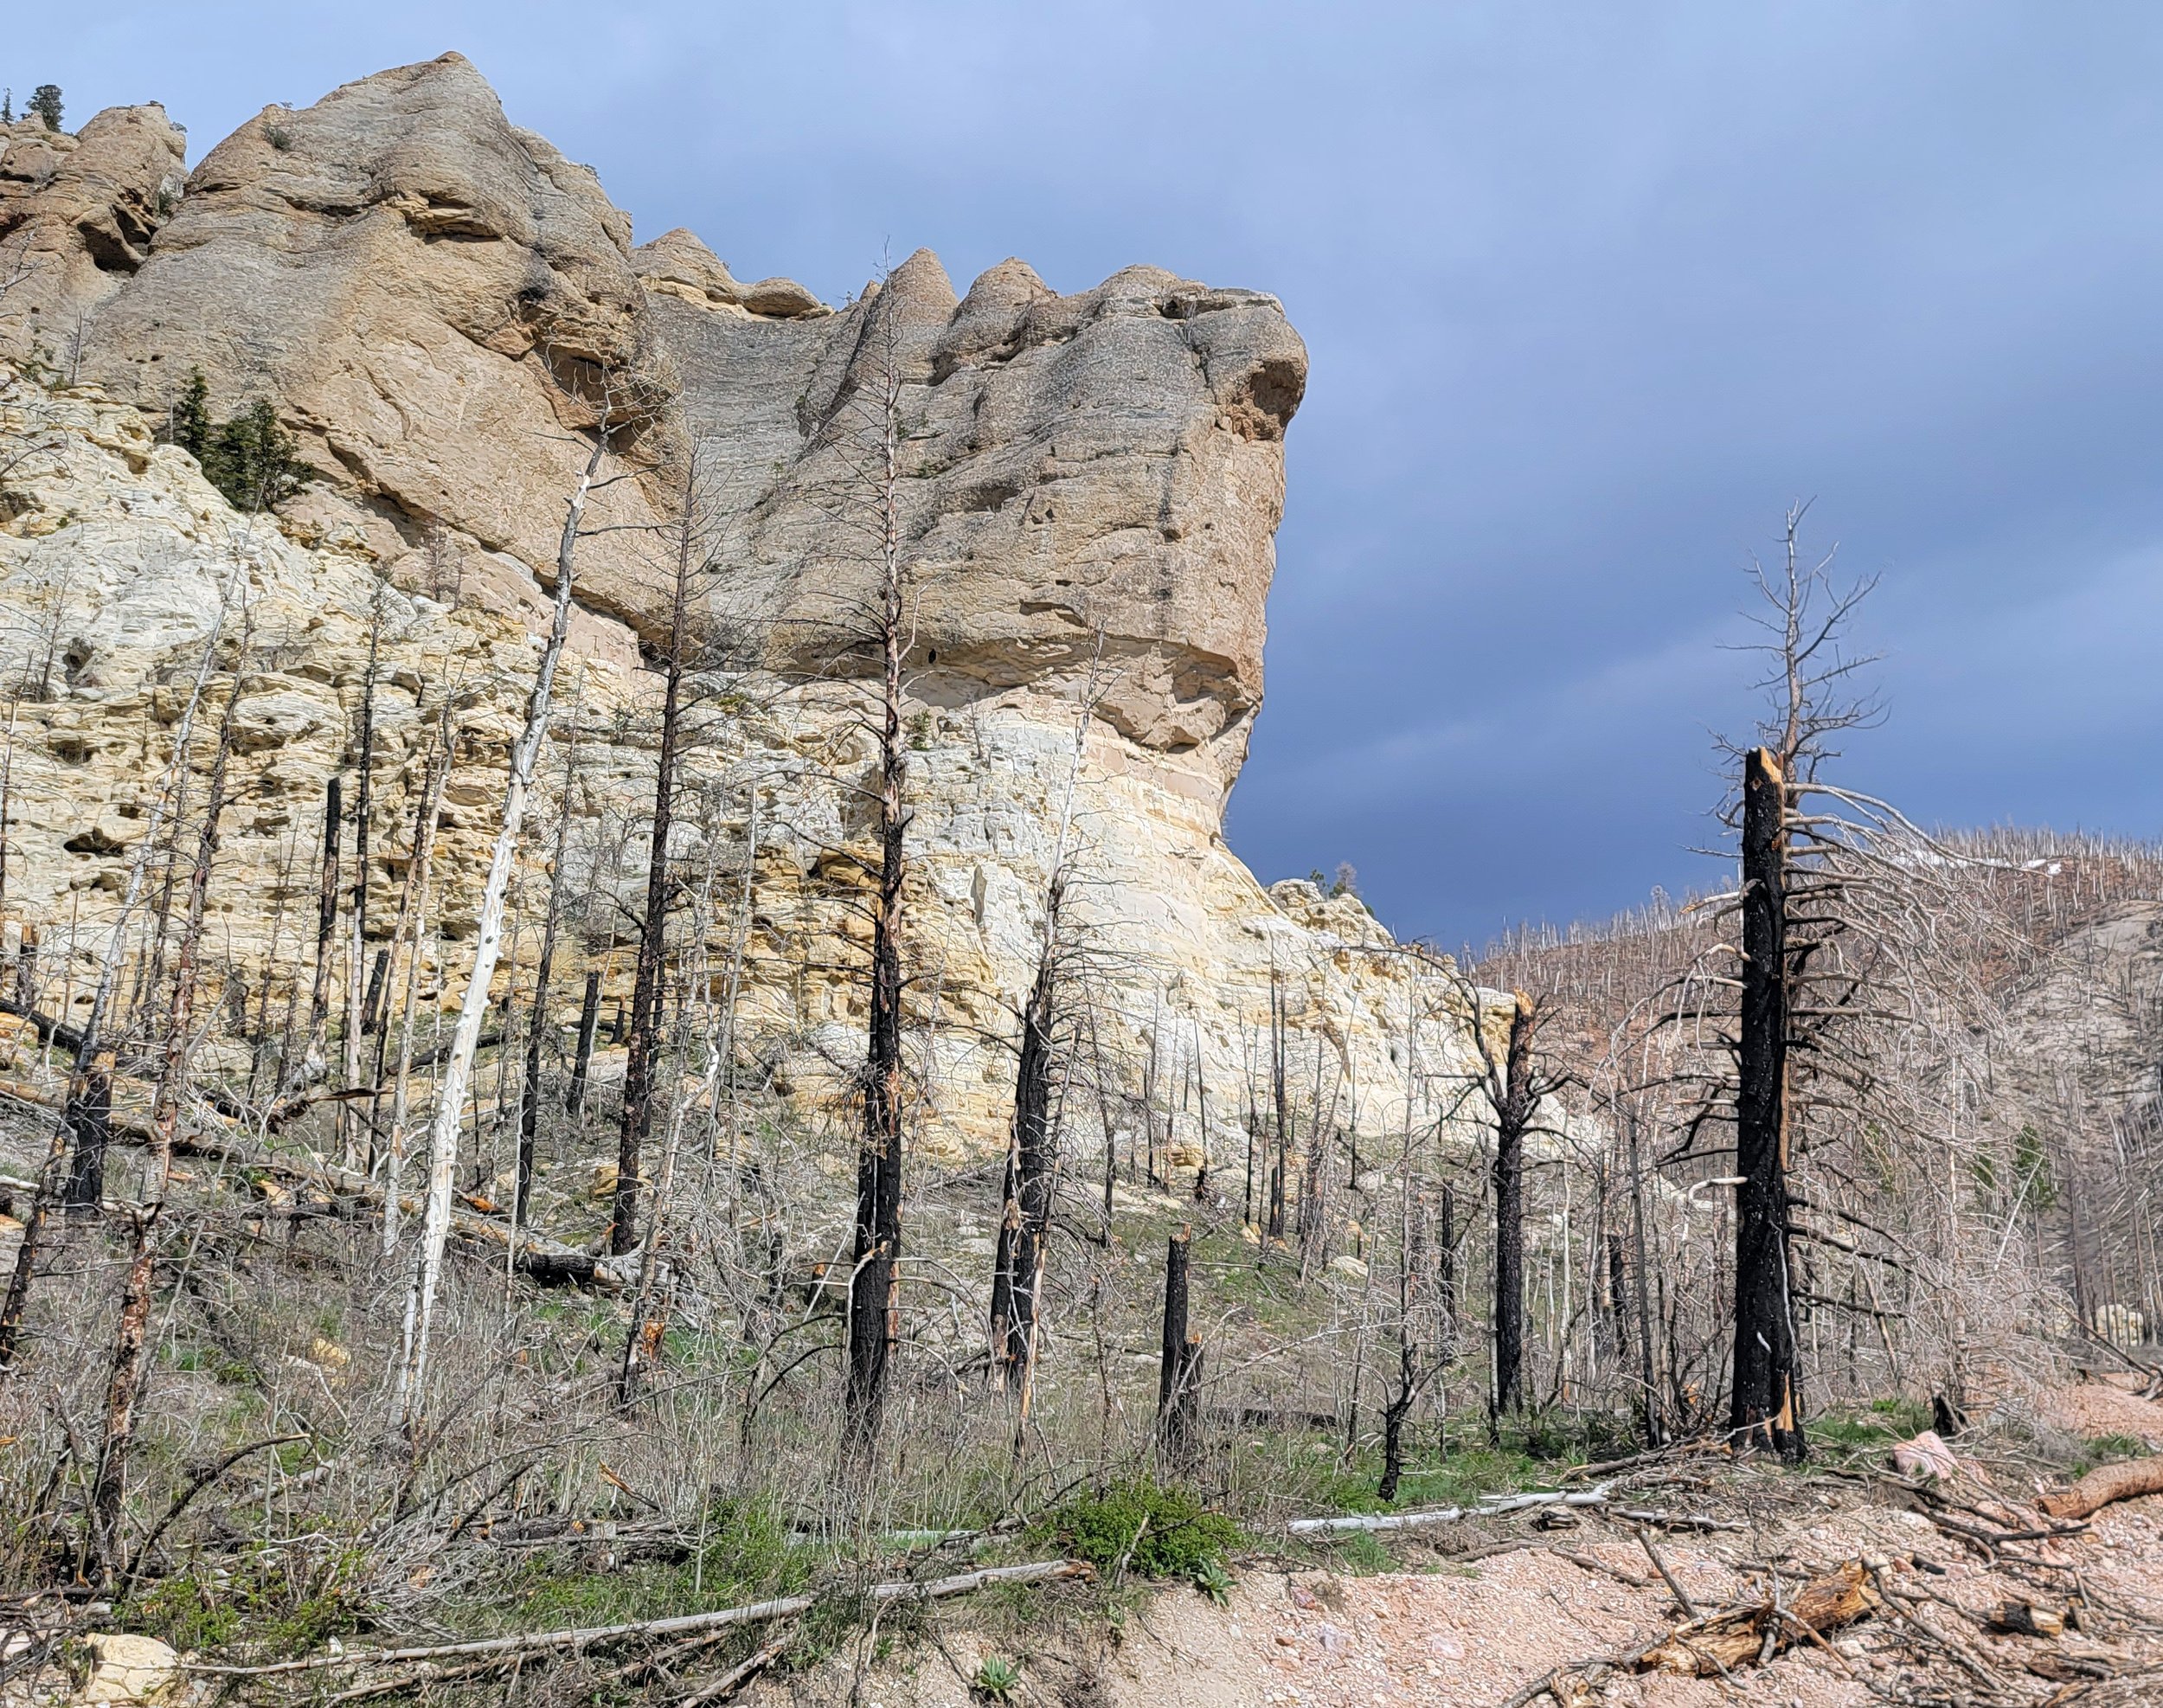 Burned out trees in front of the rocks. Almost every dry area on the continent has huge patches of burned forests.